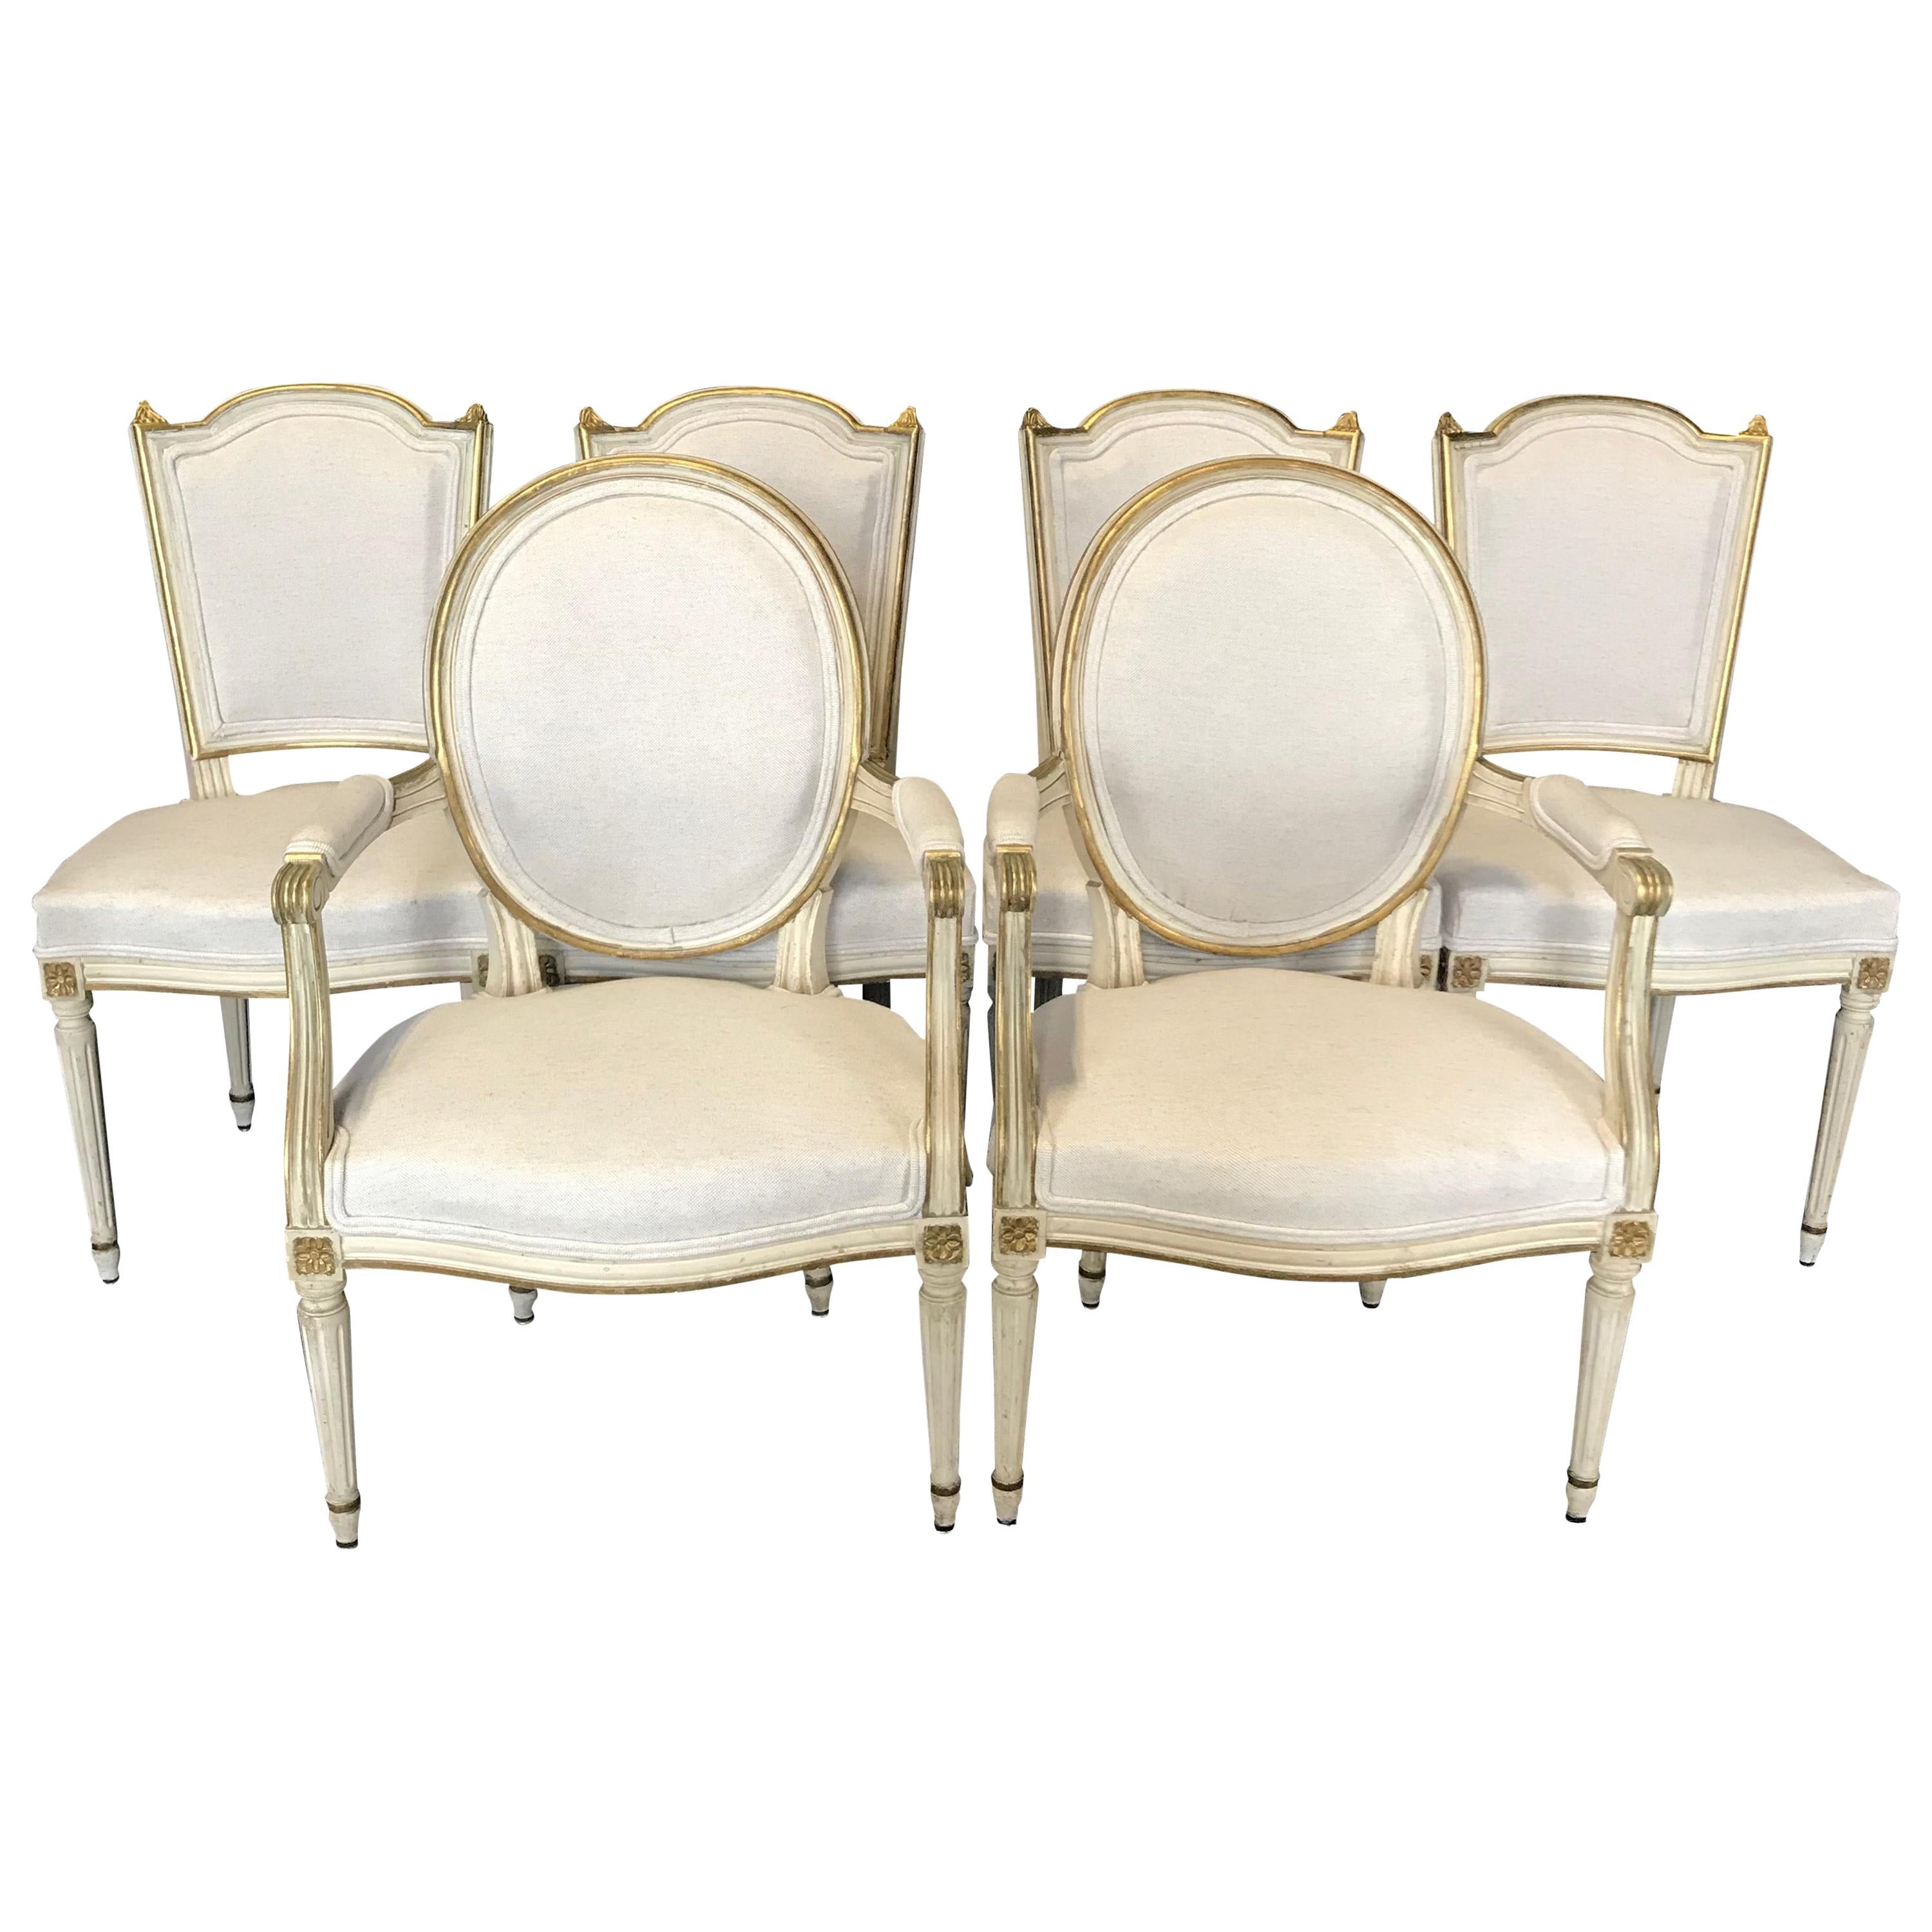 Set of Six Antique Painted Louis XVI Gustavian Style Dining Chairs